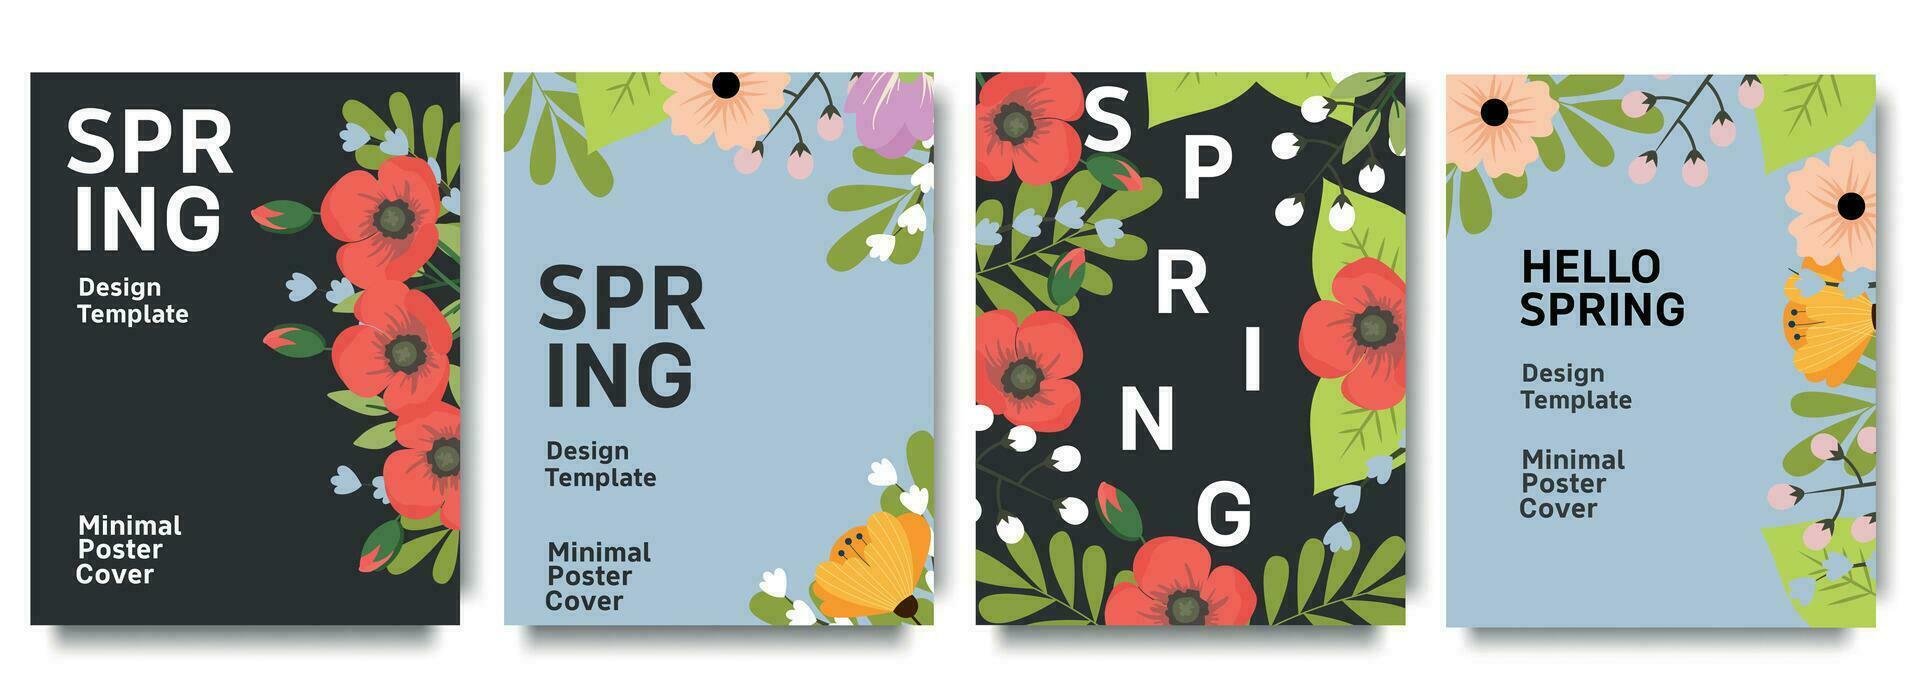 Set of trendy minimal spring posters with bright beautiful flowers and modern typography. Spring background, cover, sale banner, flyer design. Template for advertising, web, social media. vector